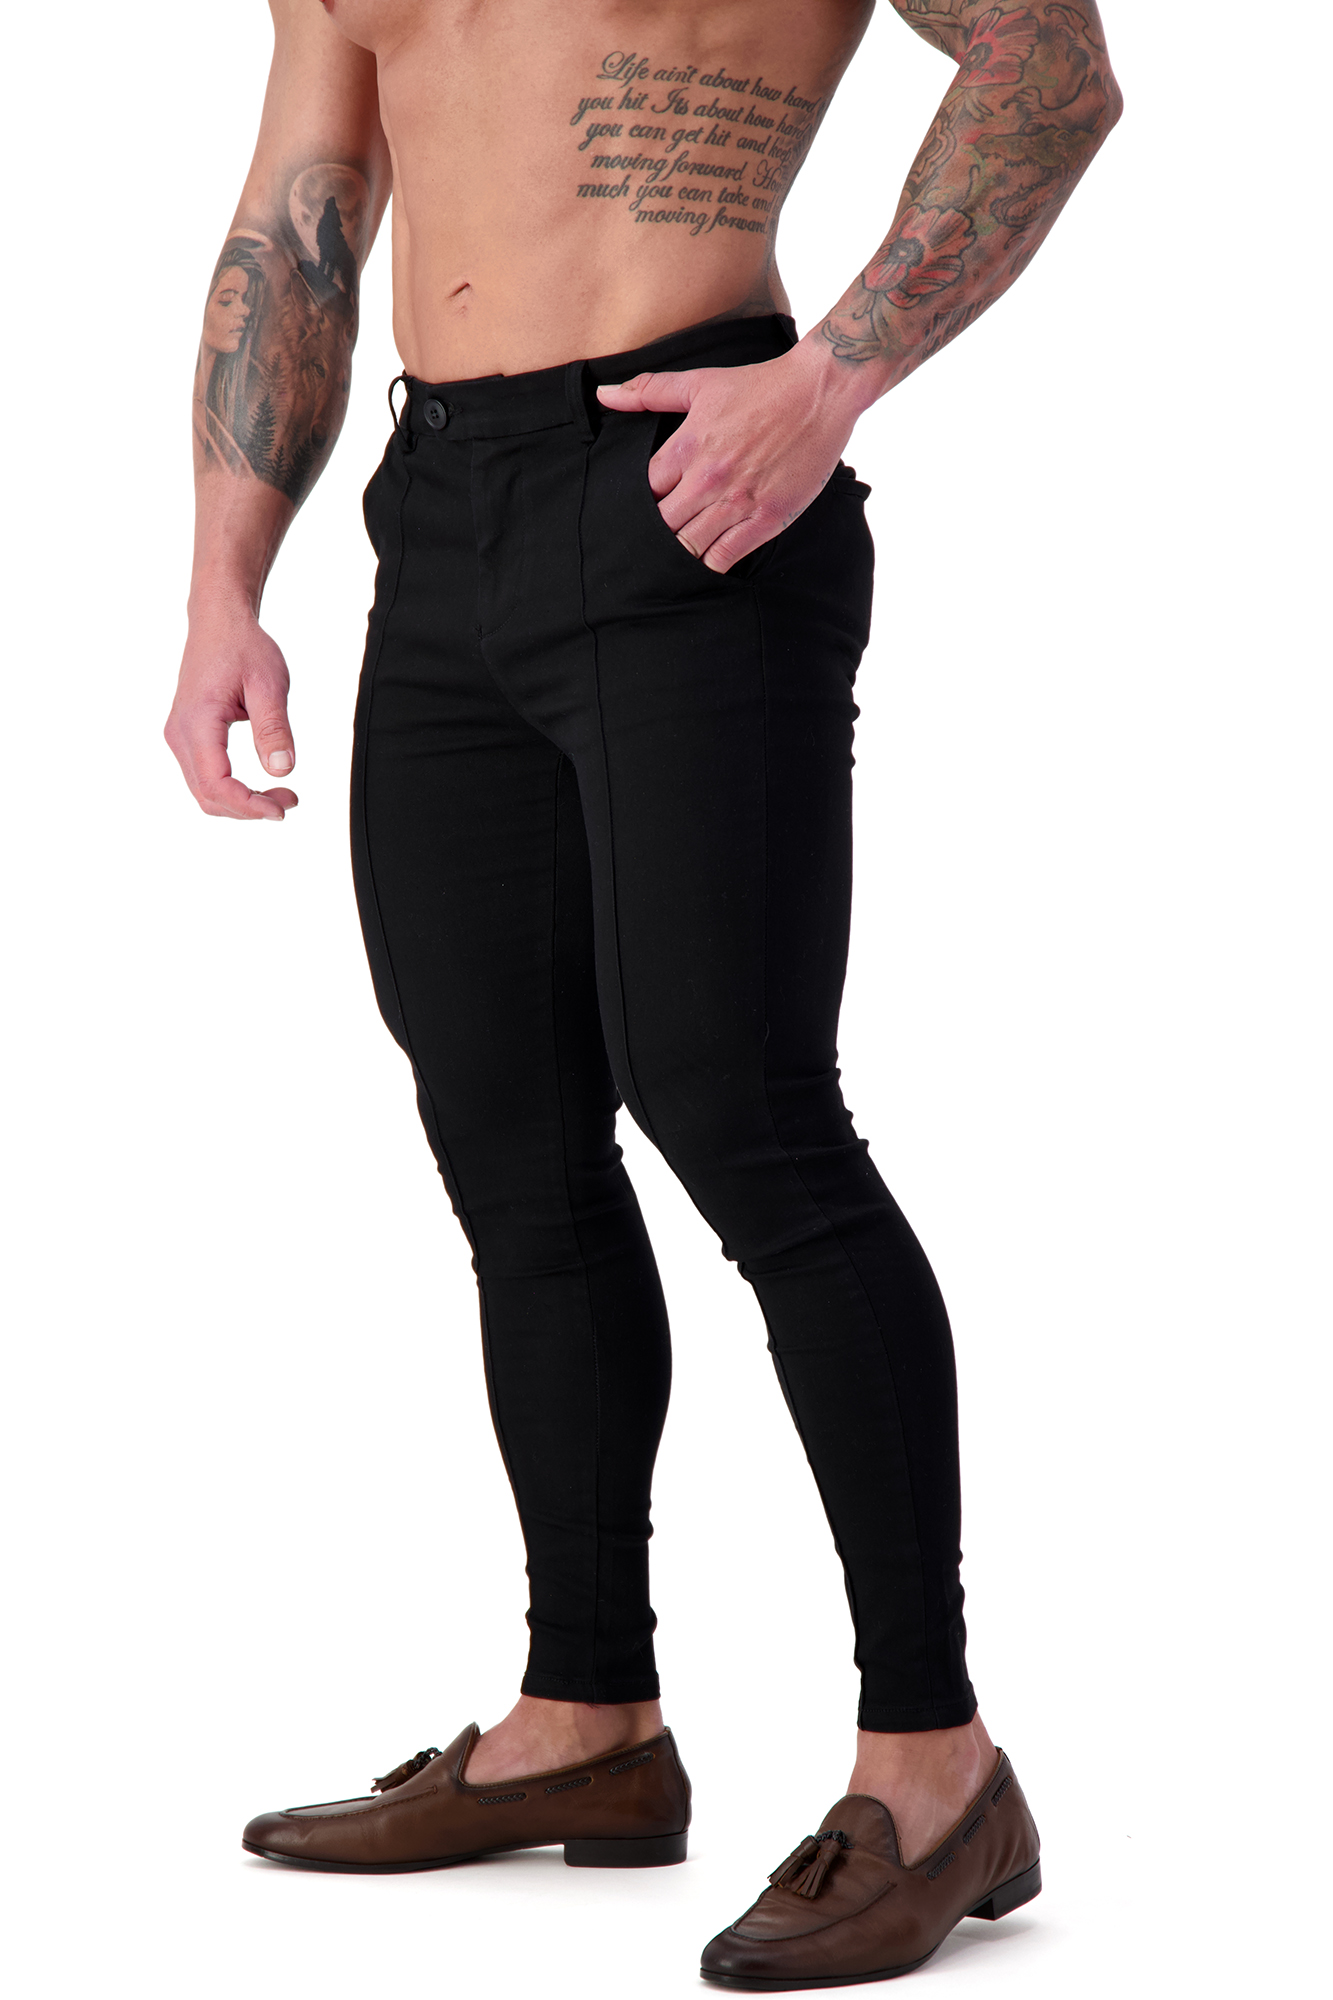 AG17 Muscle Fit Trousers - Black/Pintuck